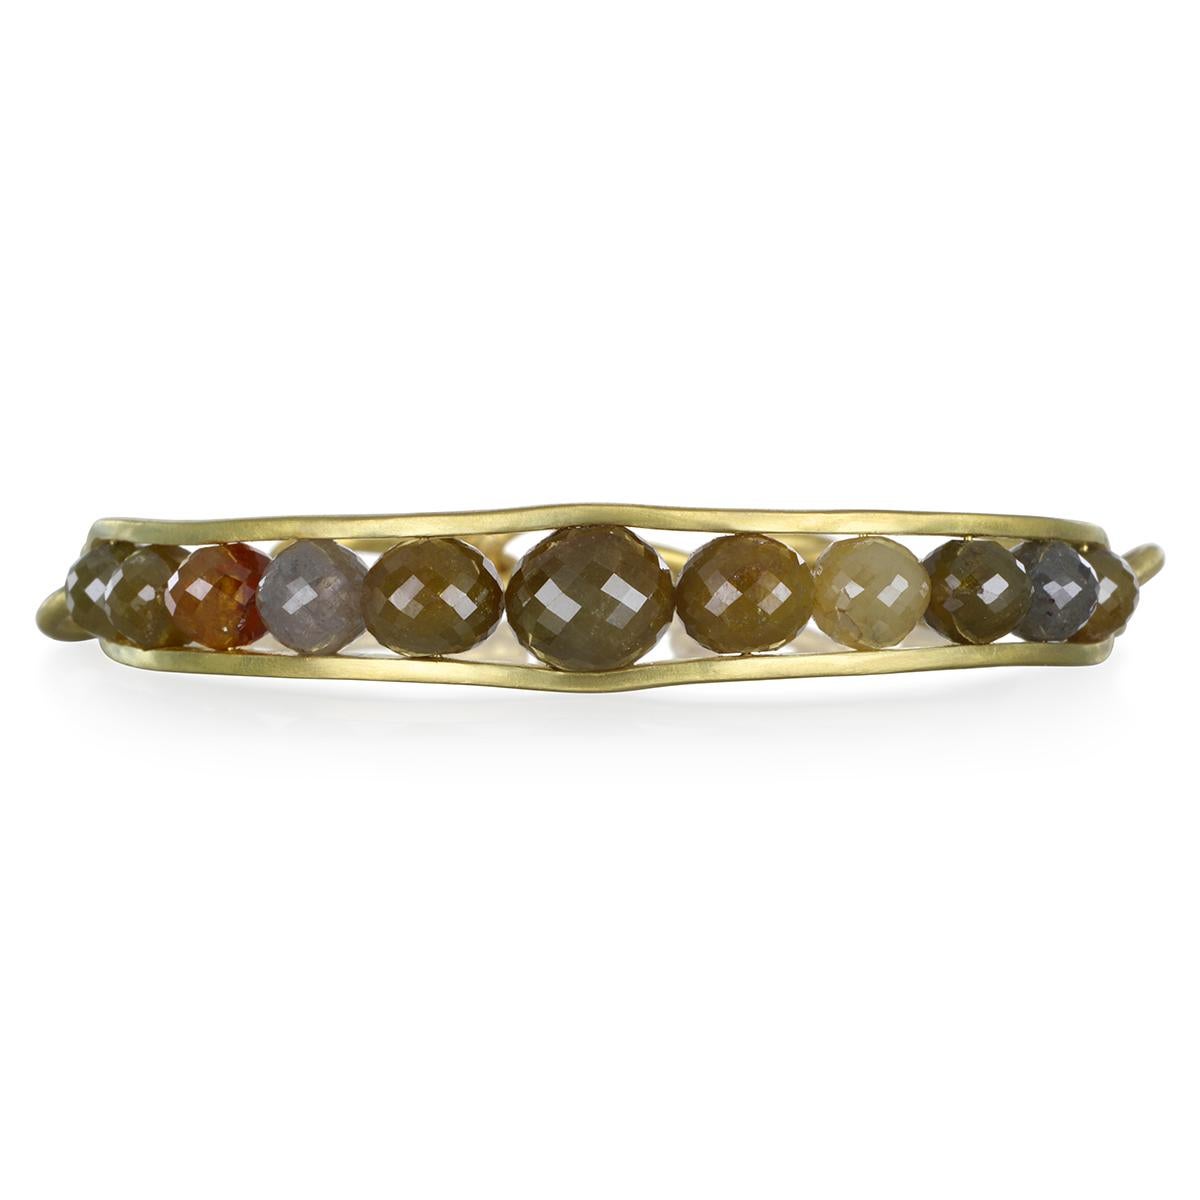 One Of A Kind - Faye Kim's 18 Karat Gold Raw Diamond Bead Cuff / Bangle has both style and substance.  Handcrafted with multicolored raw diamond beads, gently graduated in size.  Finished with gold links for a comfortable fit

Diamonds: Natural